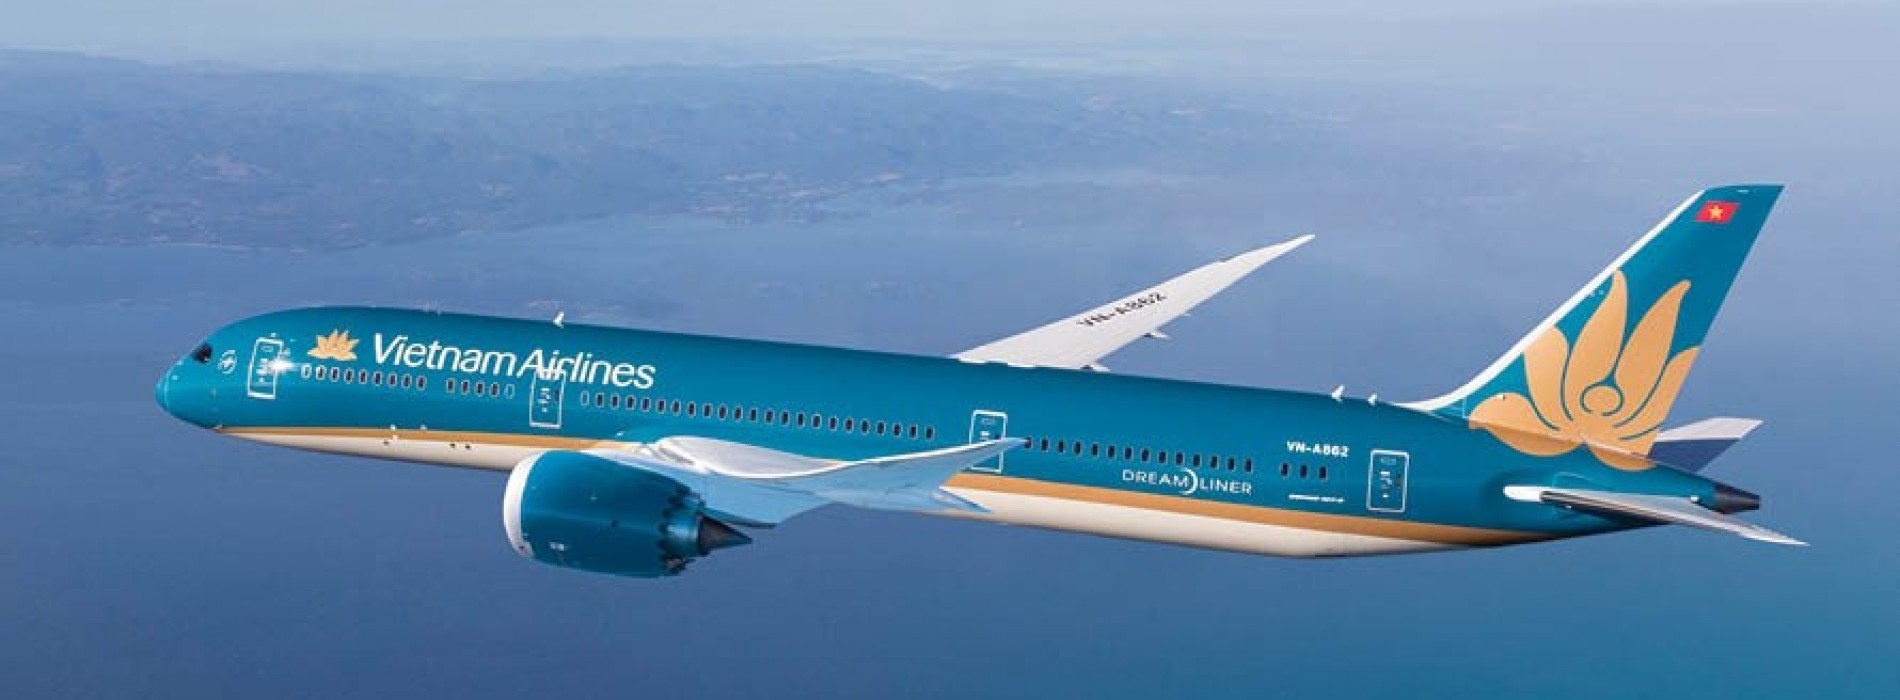 Vietnam Airlines renews distribution agreement with Sabre